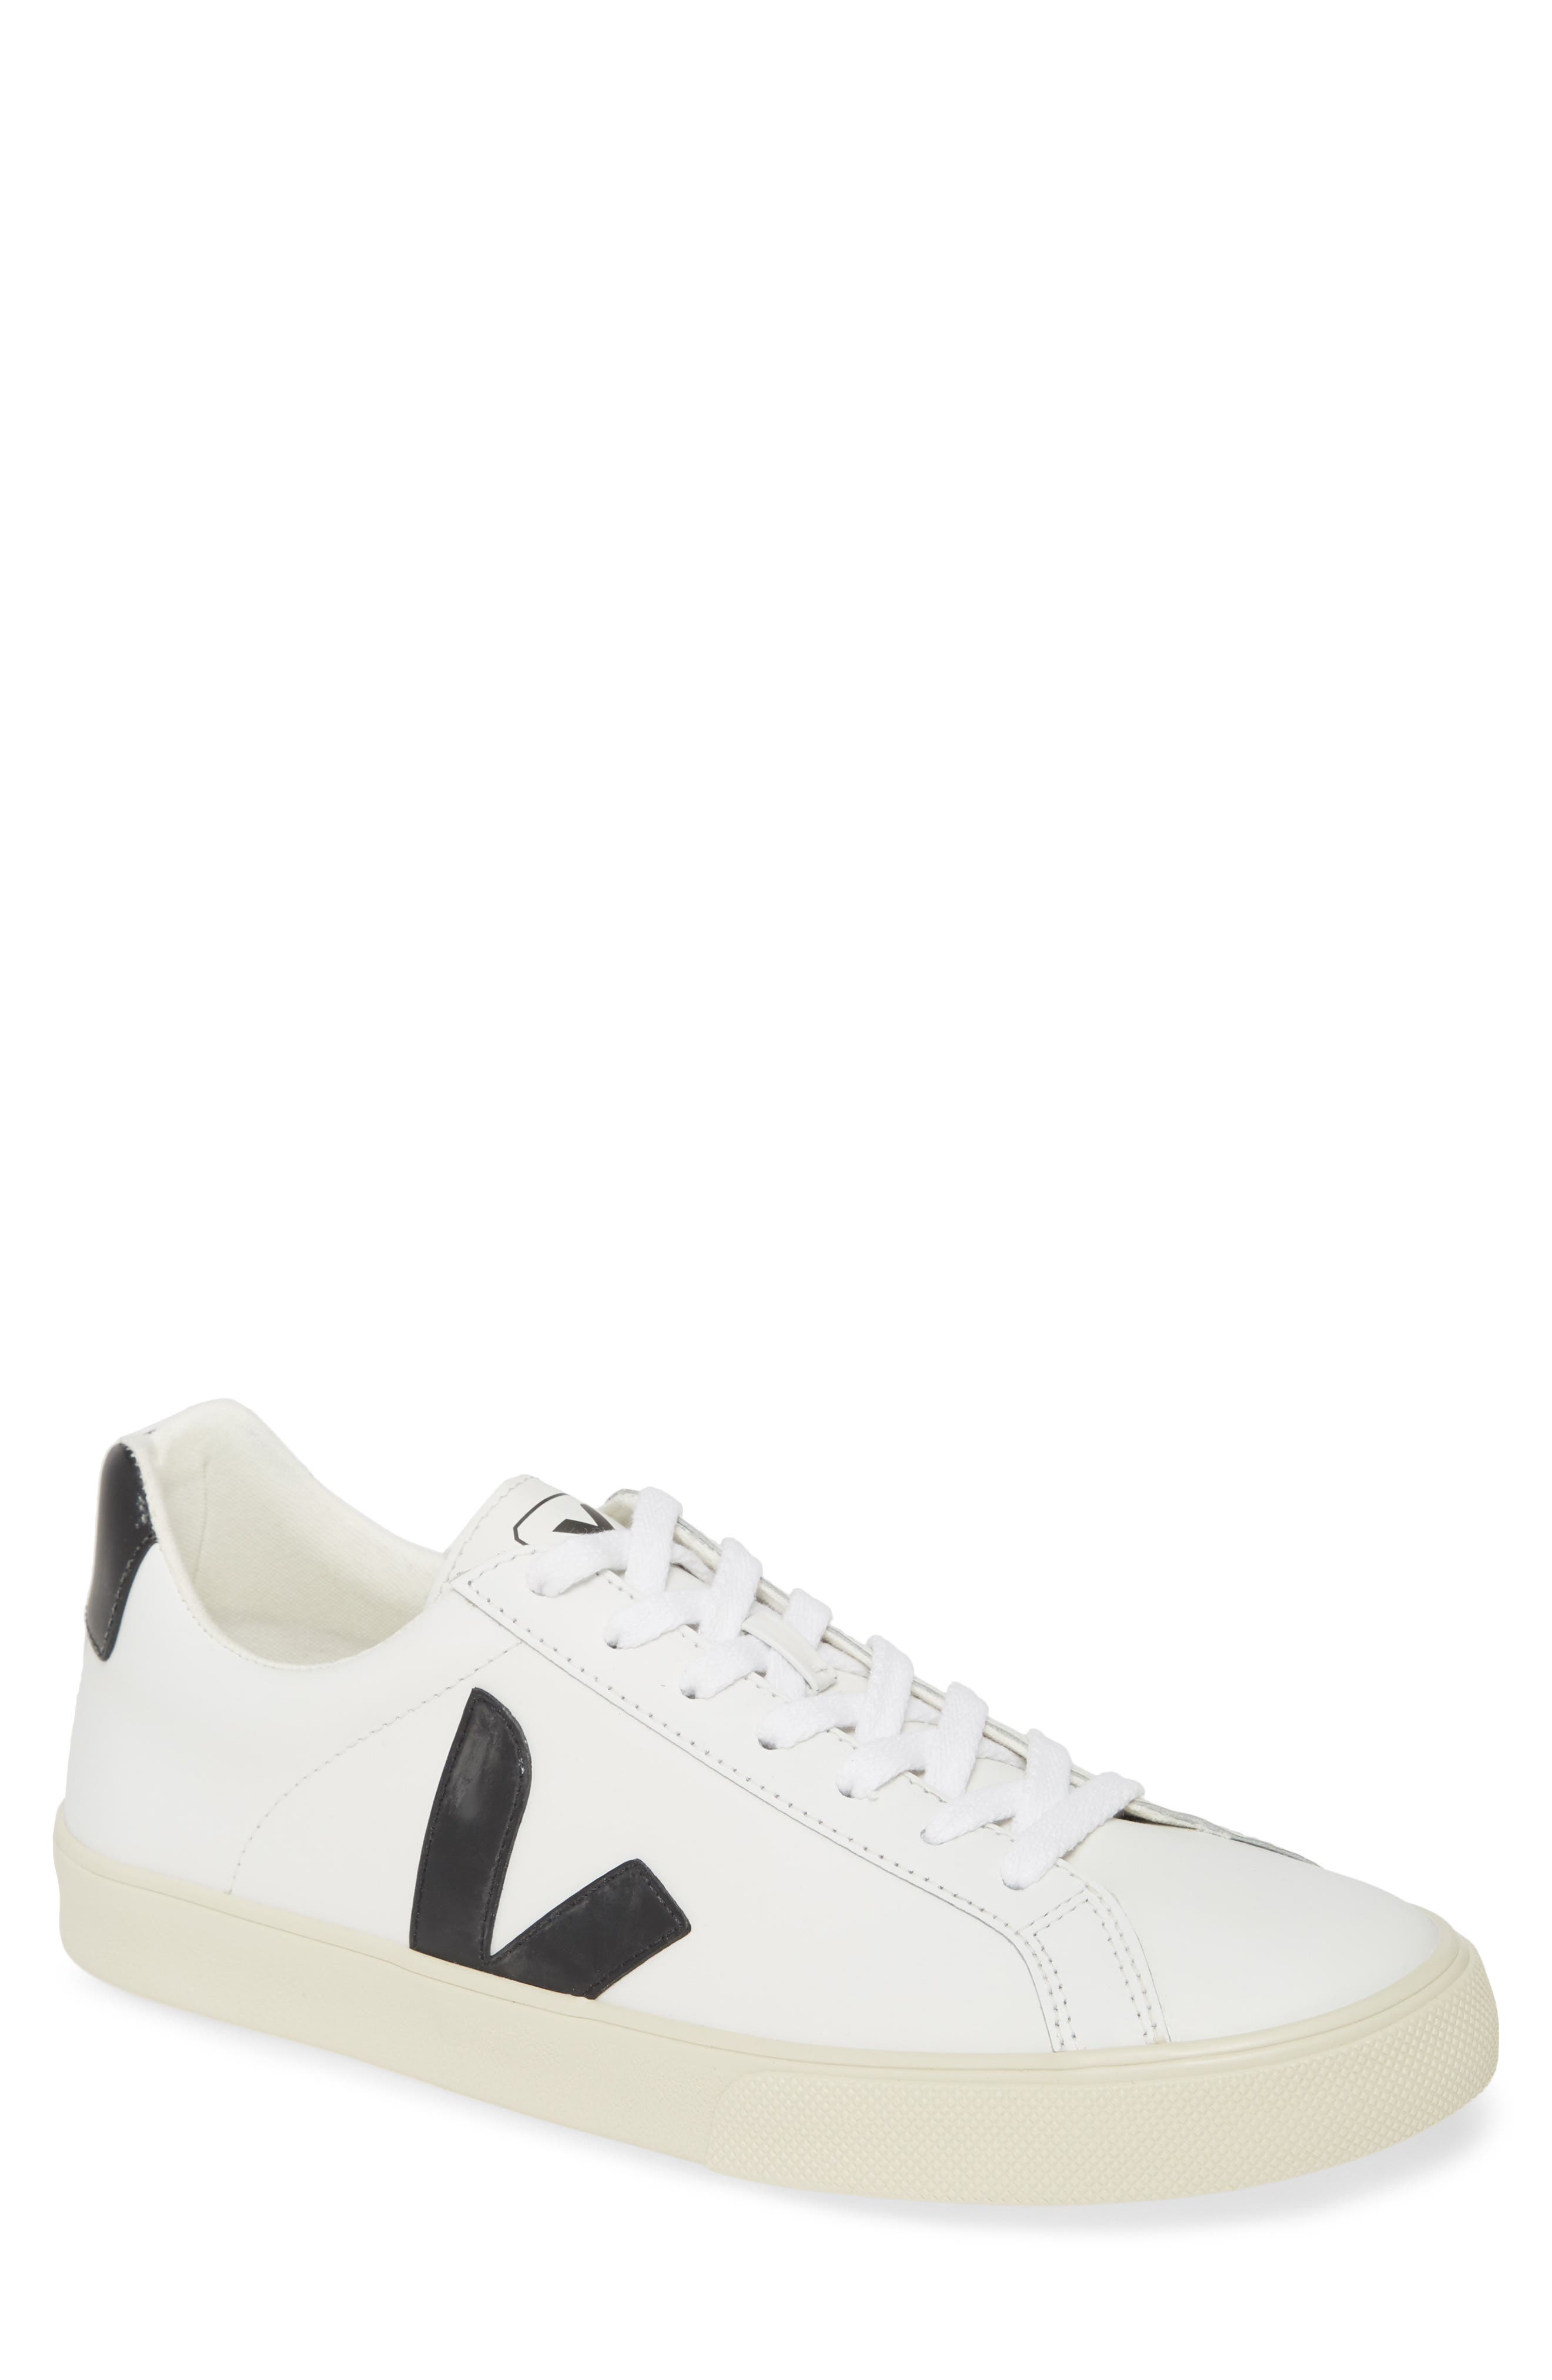 white shoes nordstrom